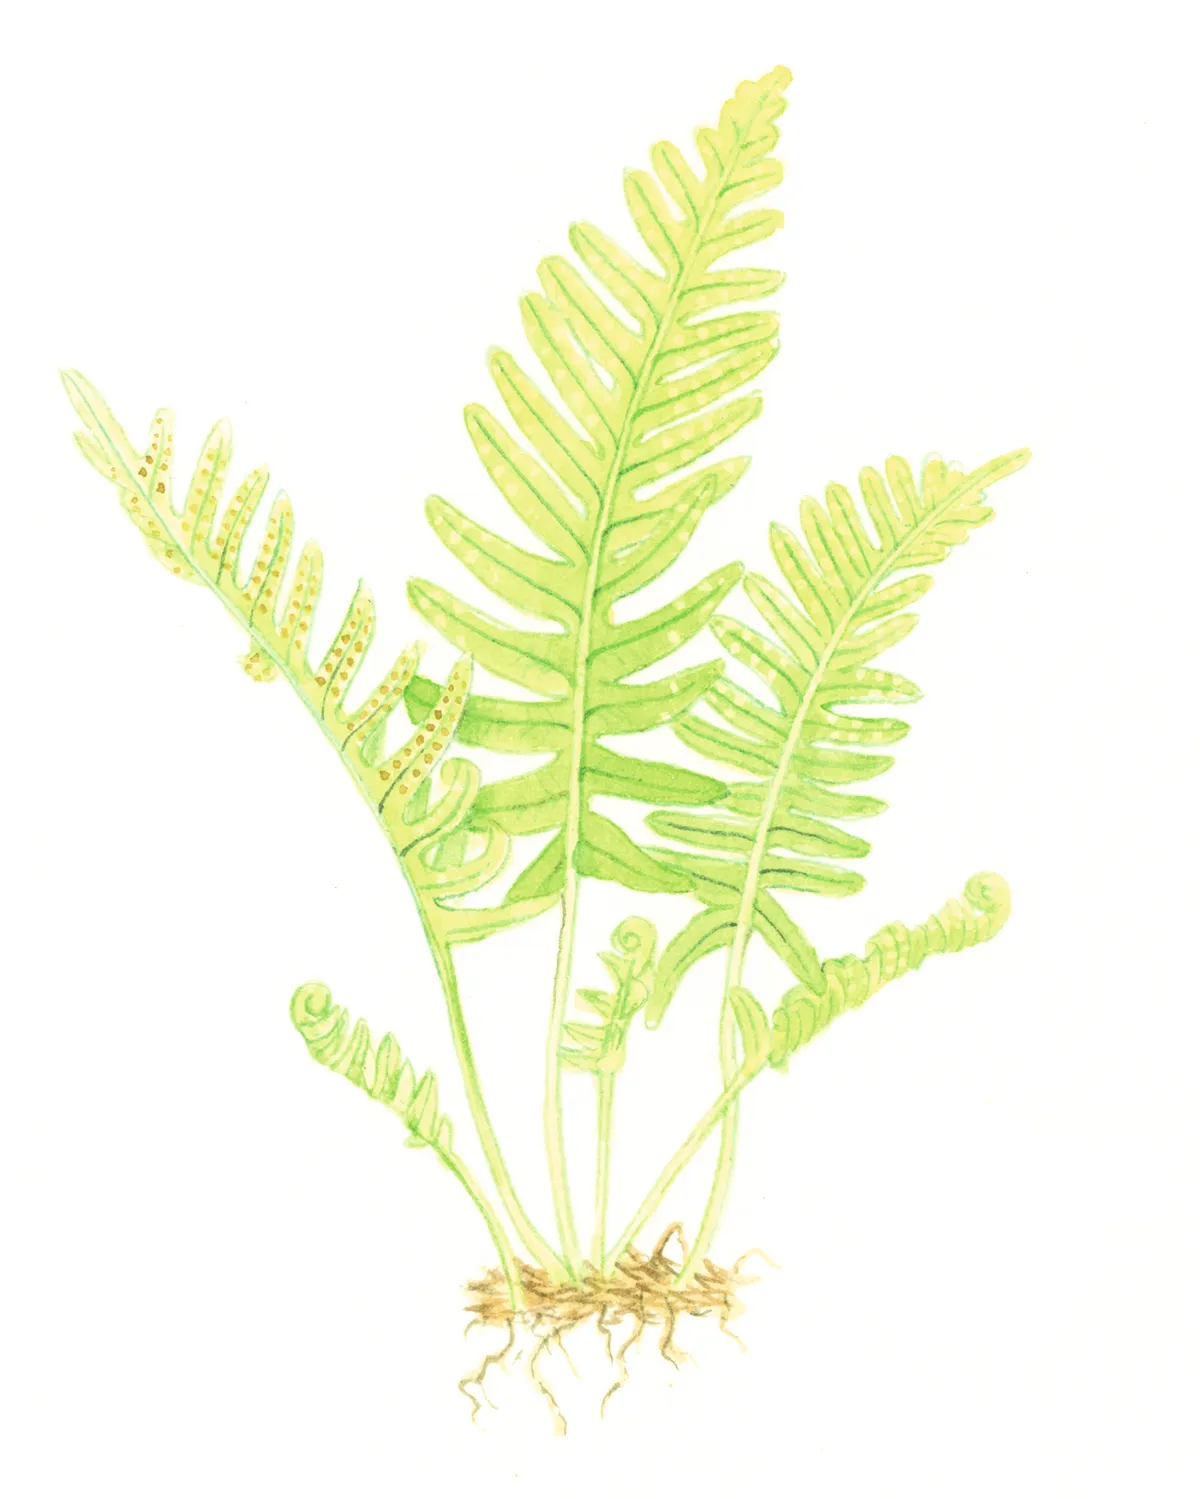 Common polypody fern. © Felicity Rose Cole